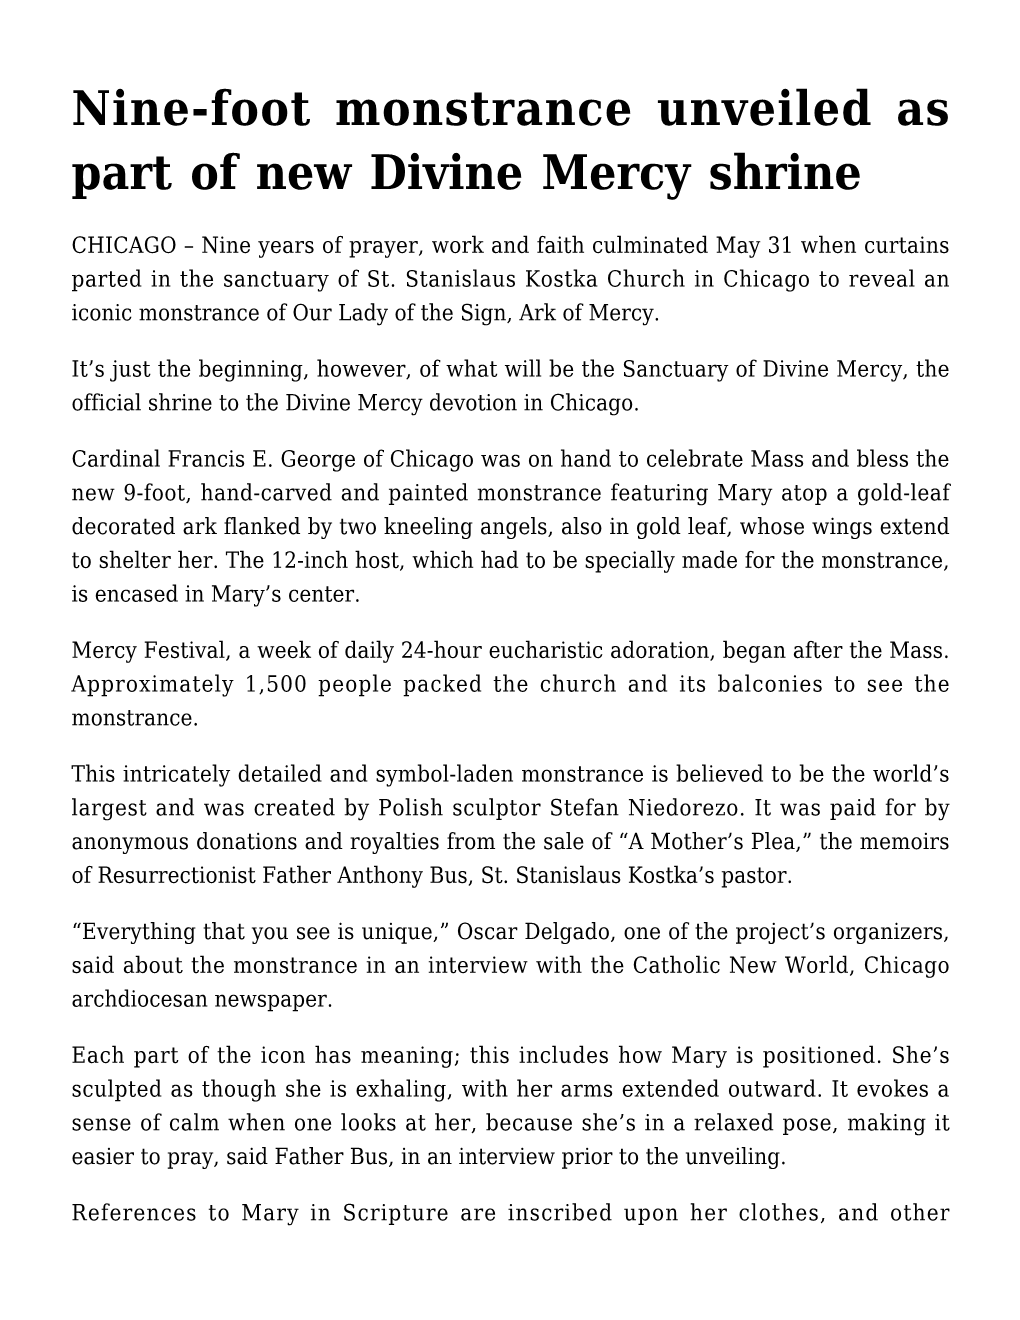 Nine-Foot Monstrance Unveiled As Part of New Divine Mercy Shrine